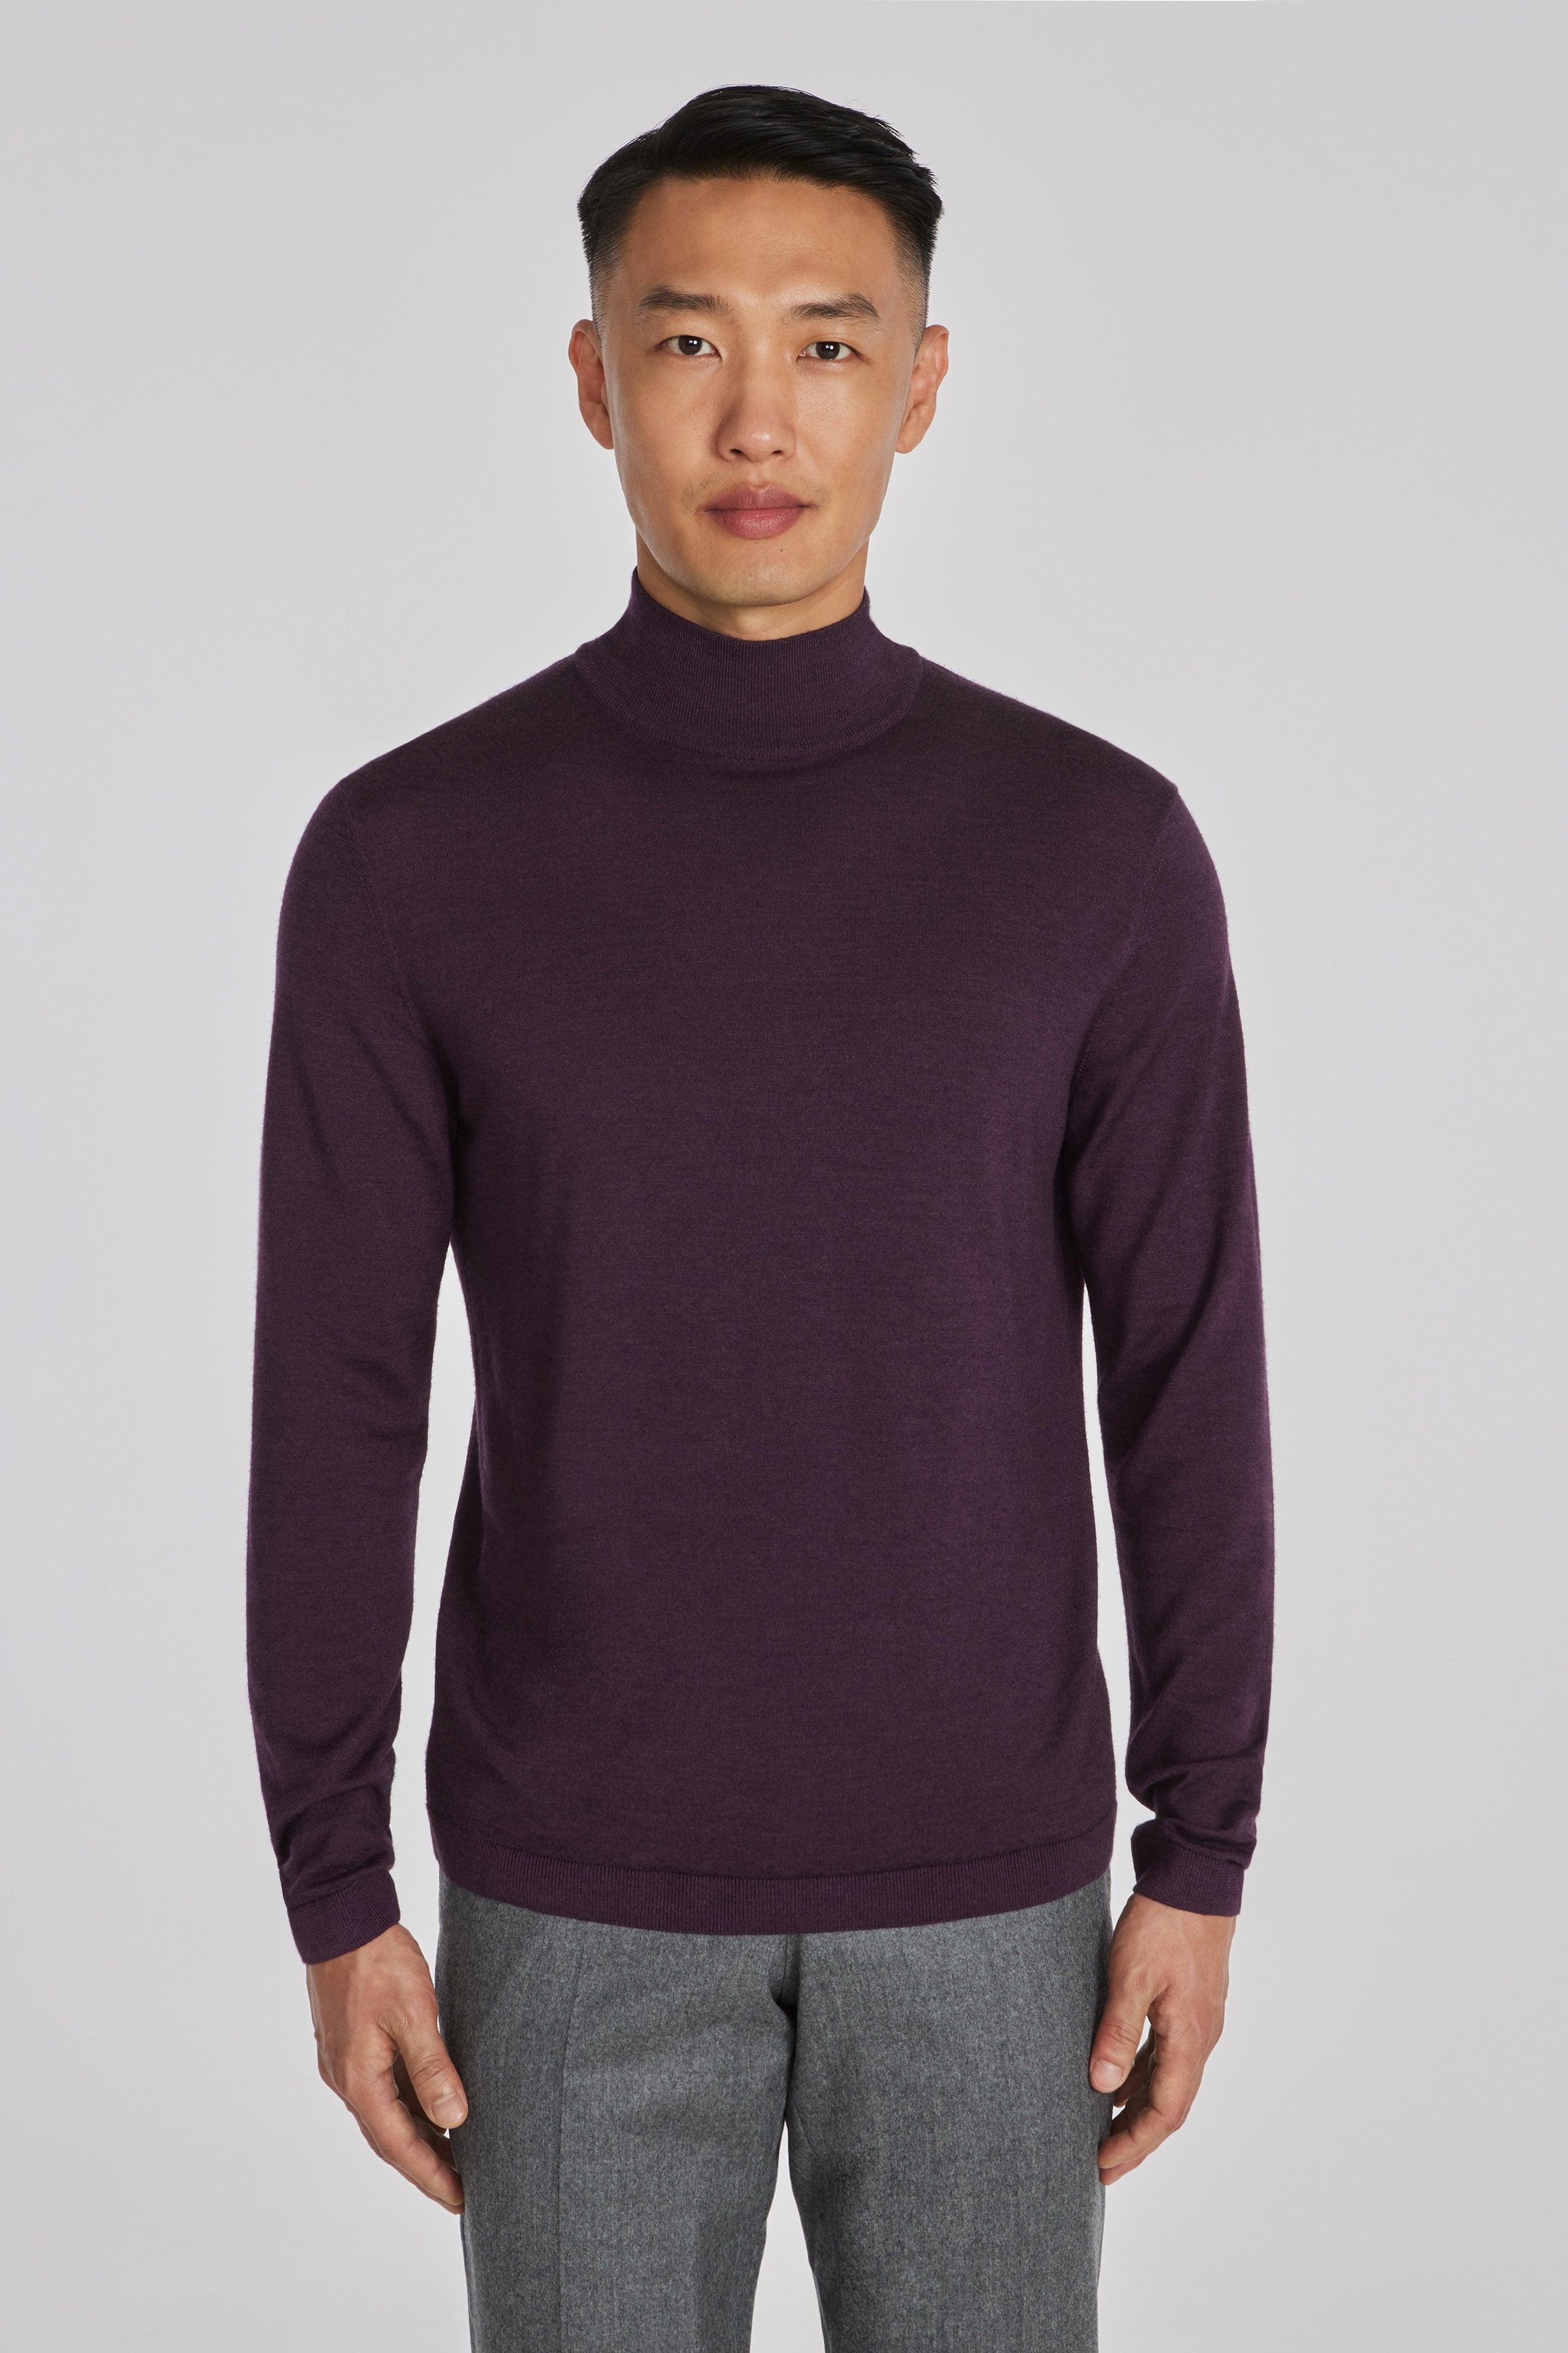 Beaudry Plum Wool, Silk and Cashmere Mock Neck Sweater